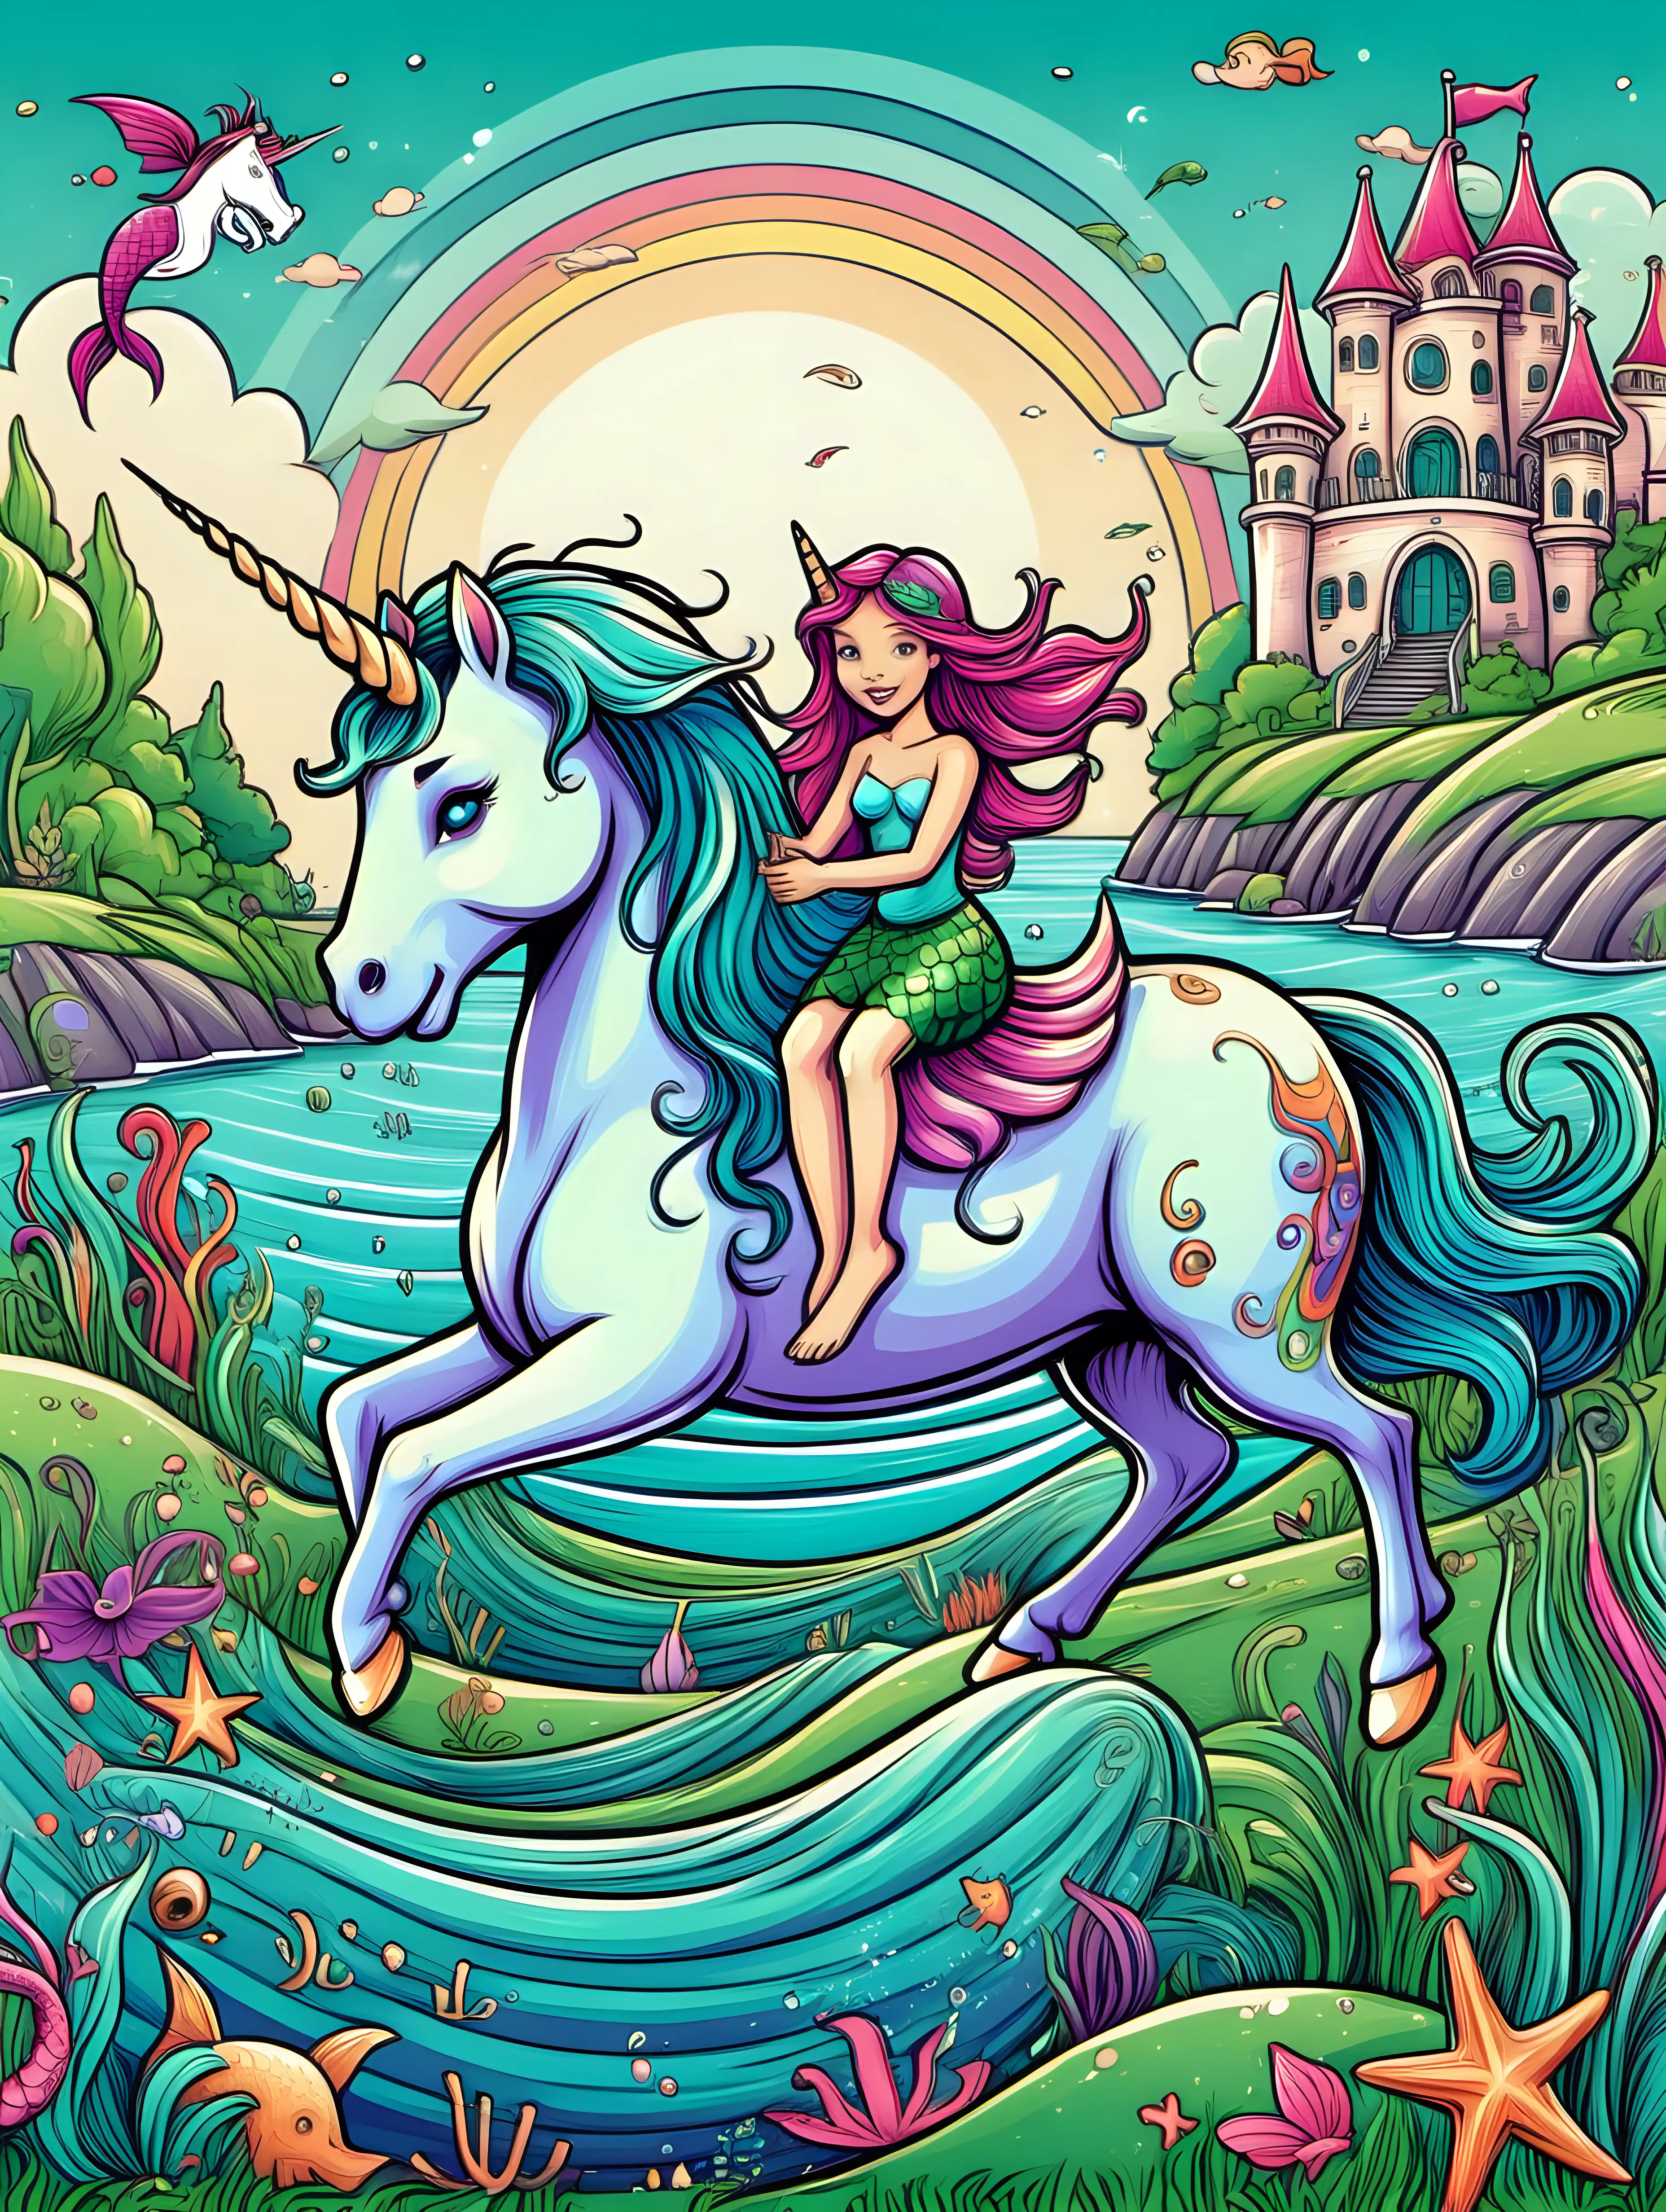 /imagine kids illustration, fairy riding a unicorn on grass next to the ocean with a mermaid in the ocean, cartoon style, thick lines, low detail, vivid color - - ar 85:110